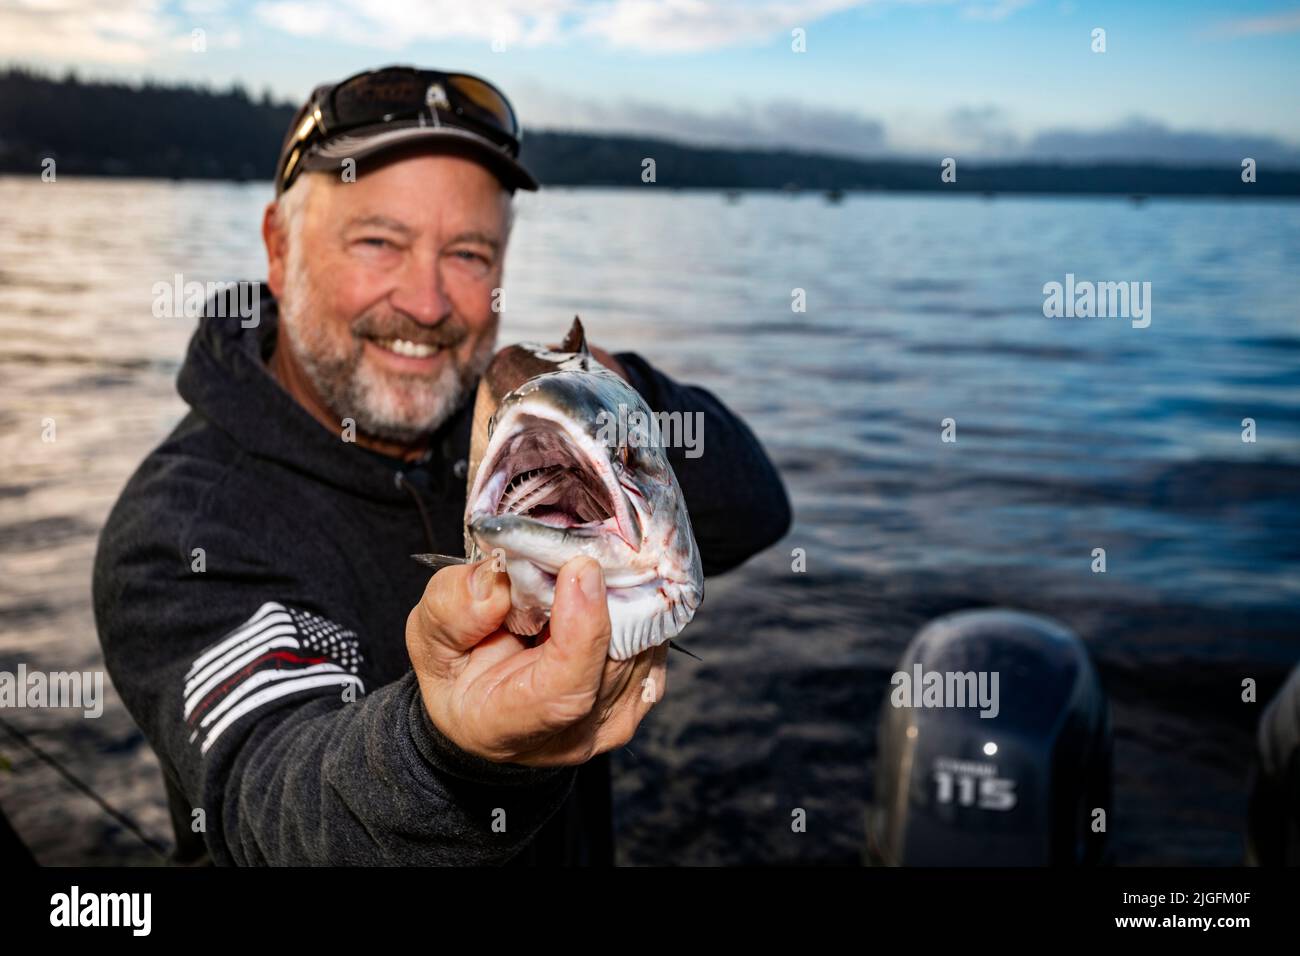 WA20631-00....WASHINGTON - Jim Johansen holds up a silver salmon he caught while trolling in the Puget Sound. MR# J5 Stock Photo